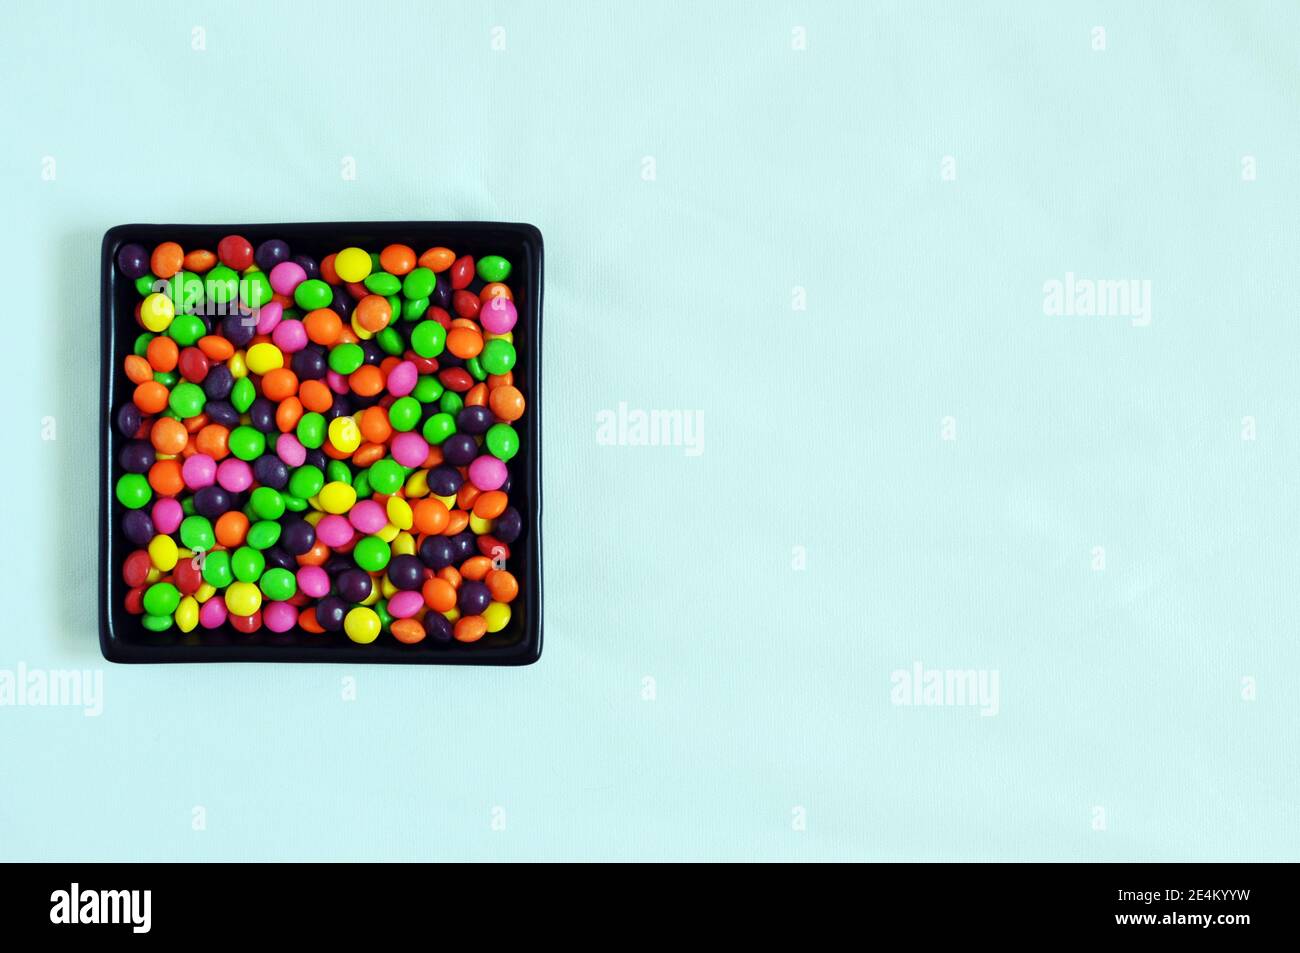 Minimalist black plate filled with little colorful candies on light blue background, copy space, top view Stock Photo